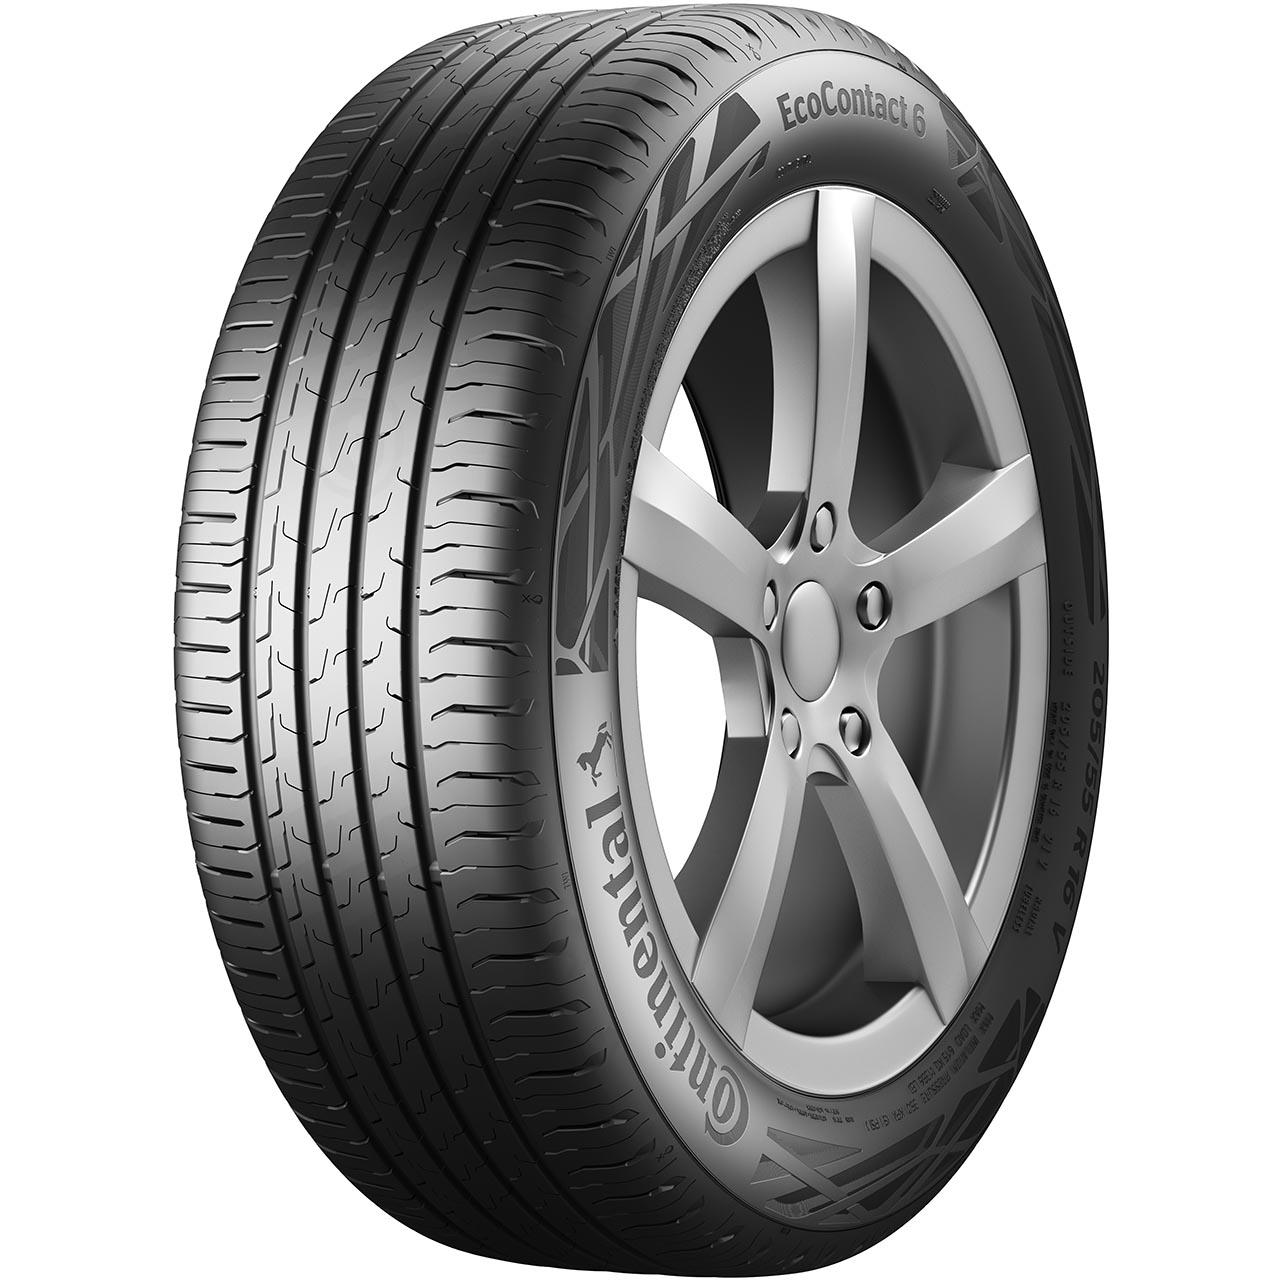 Continental ECOCONTACT 6 215/55R16 97W XL